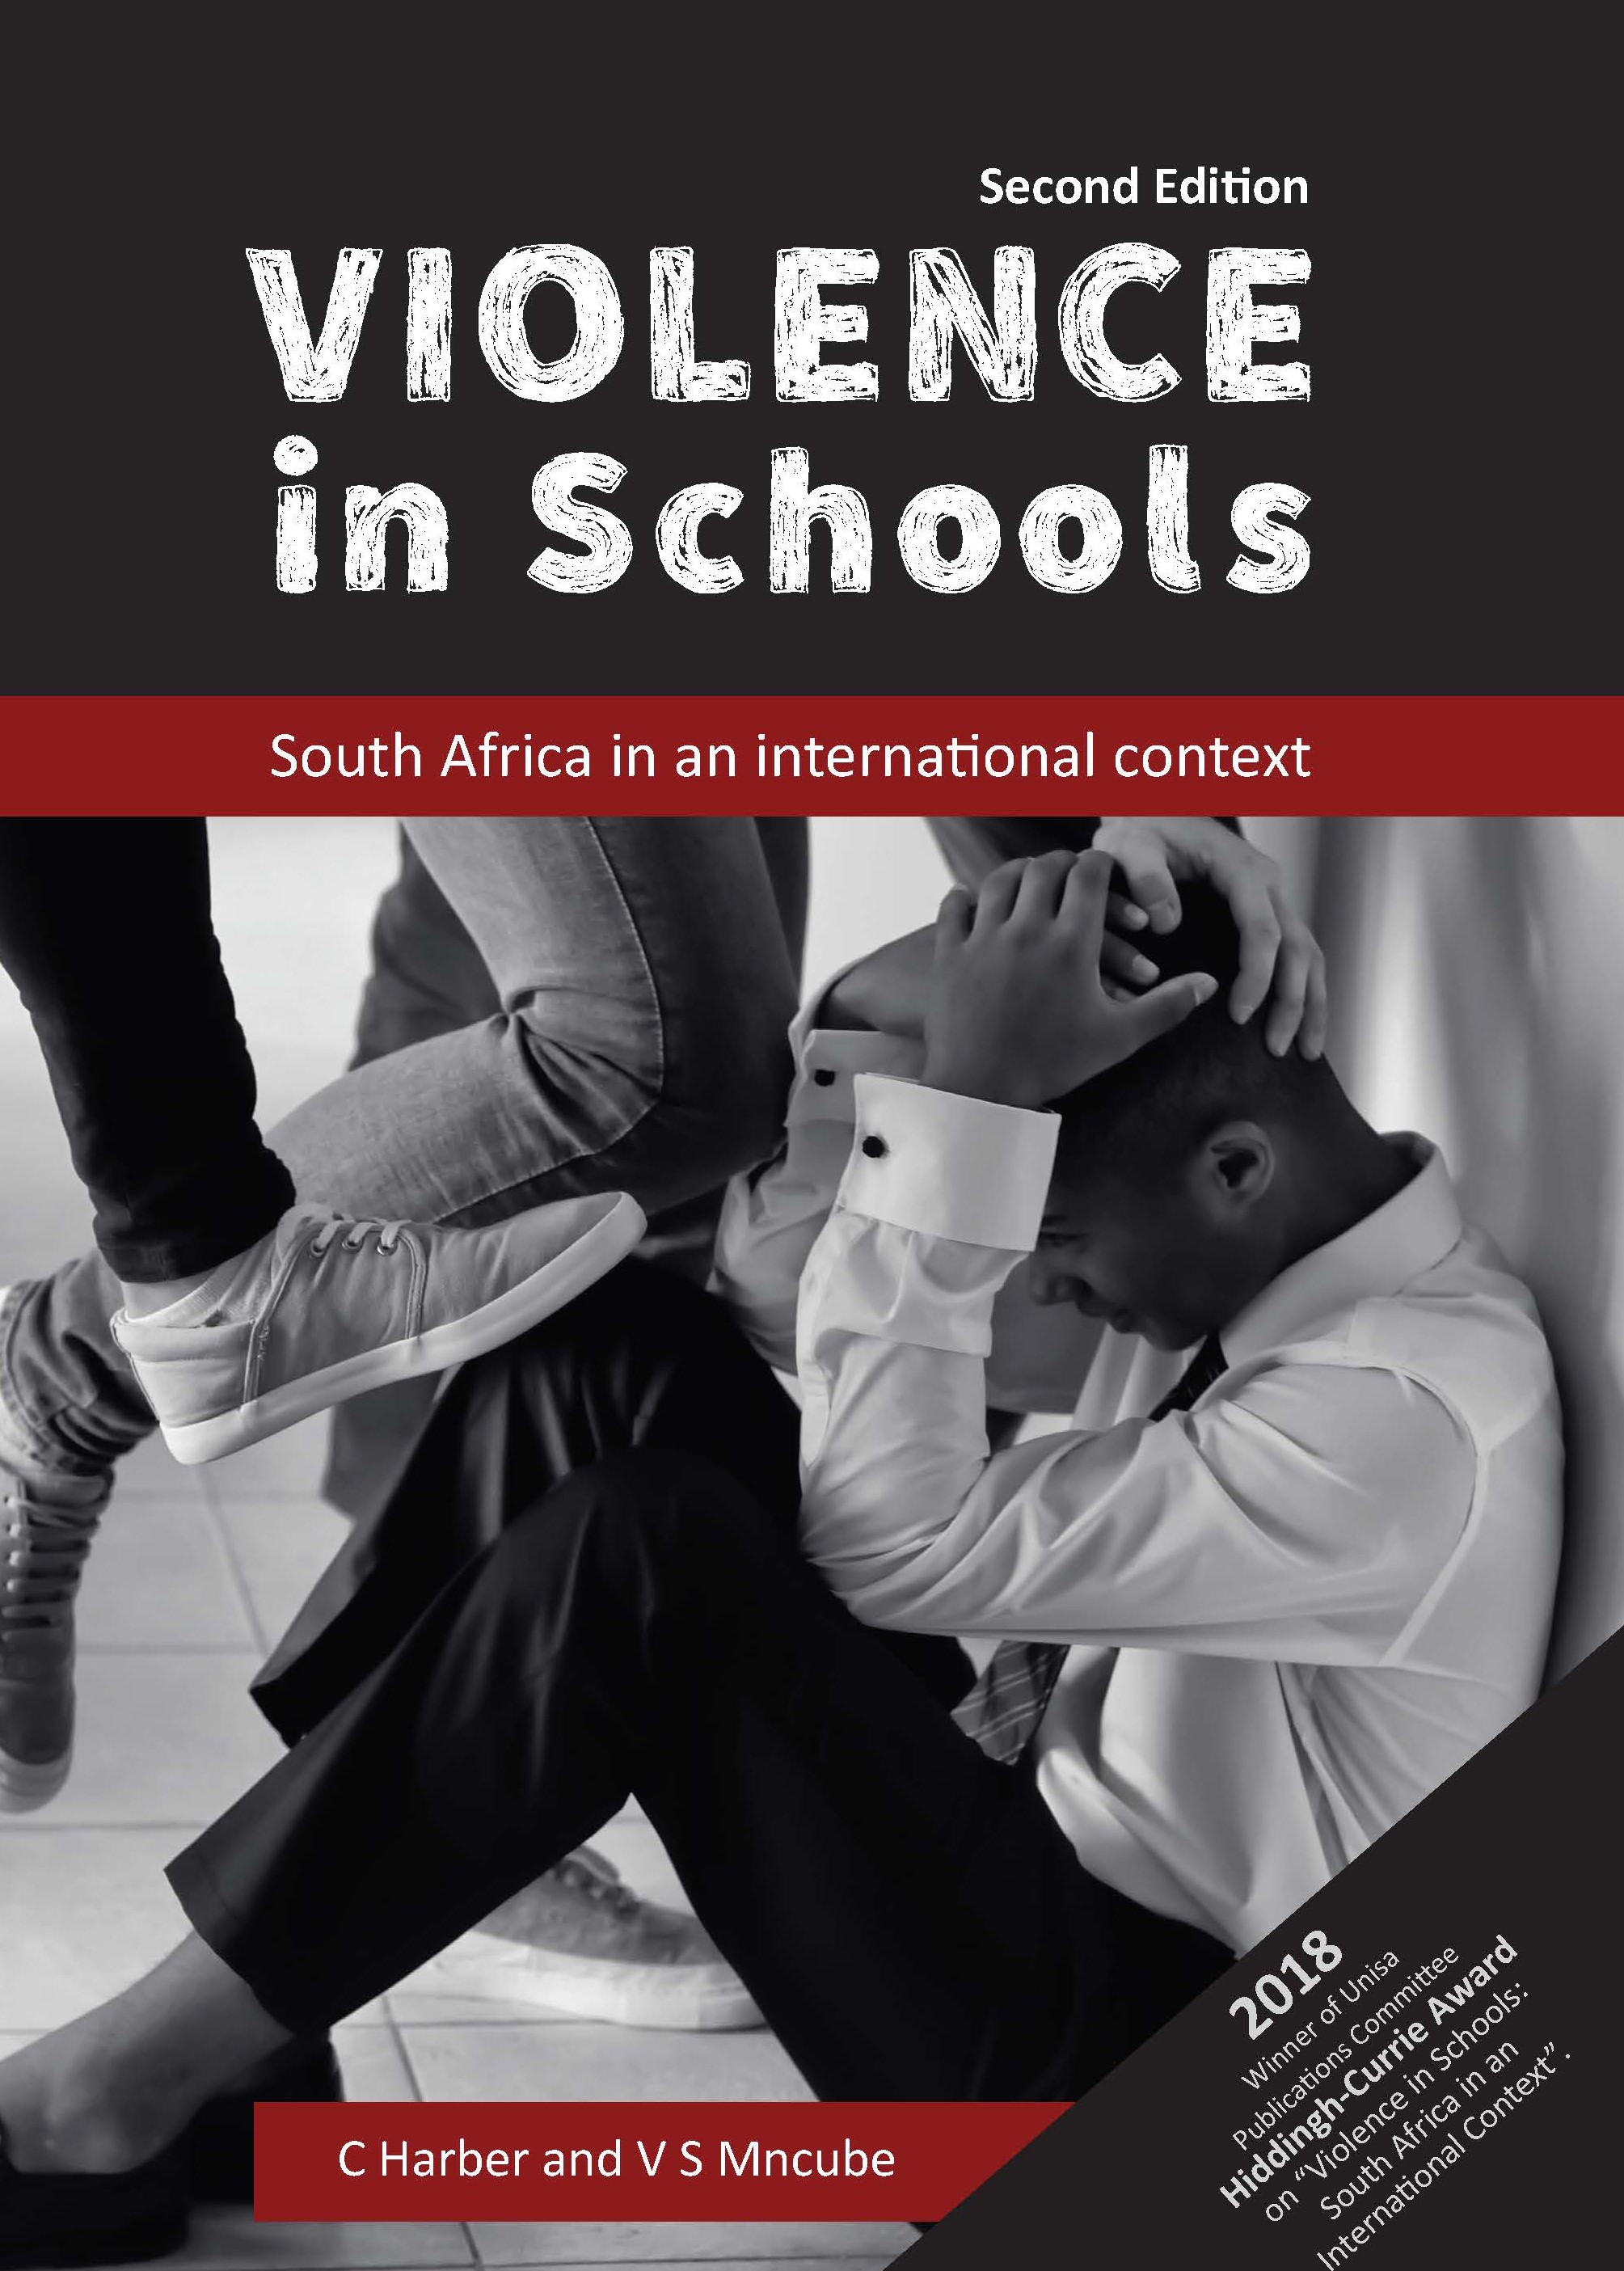 Violence in Schools: South Africa in an International Context. Second Edition